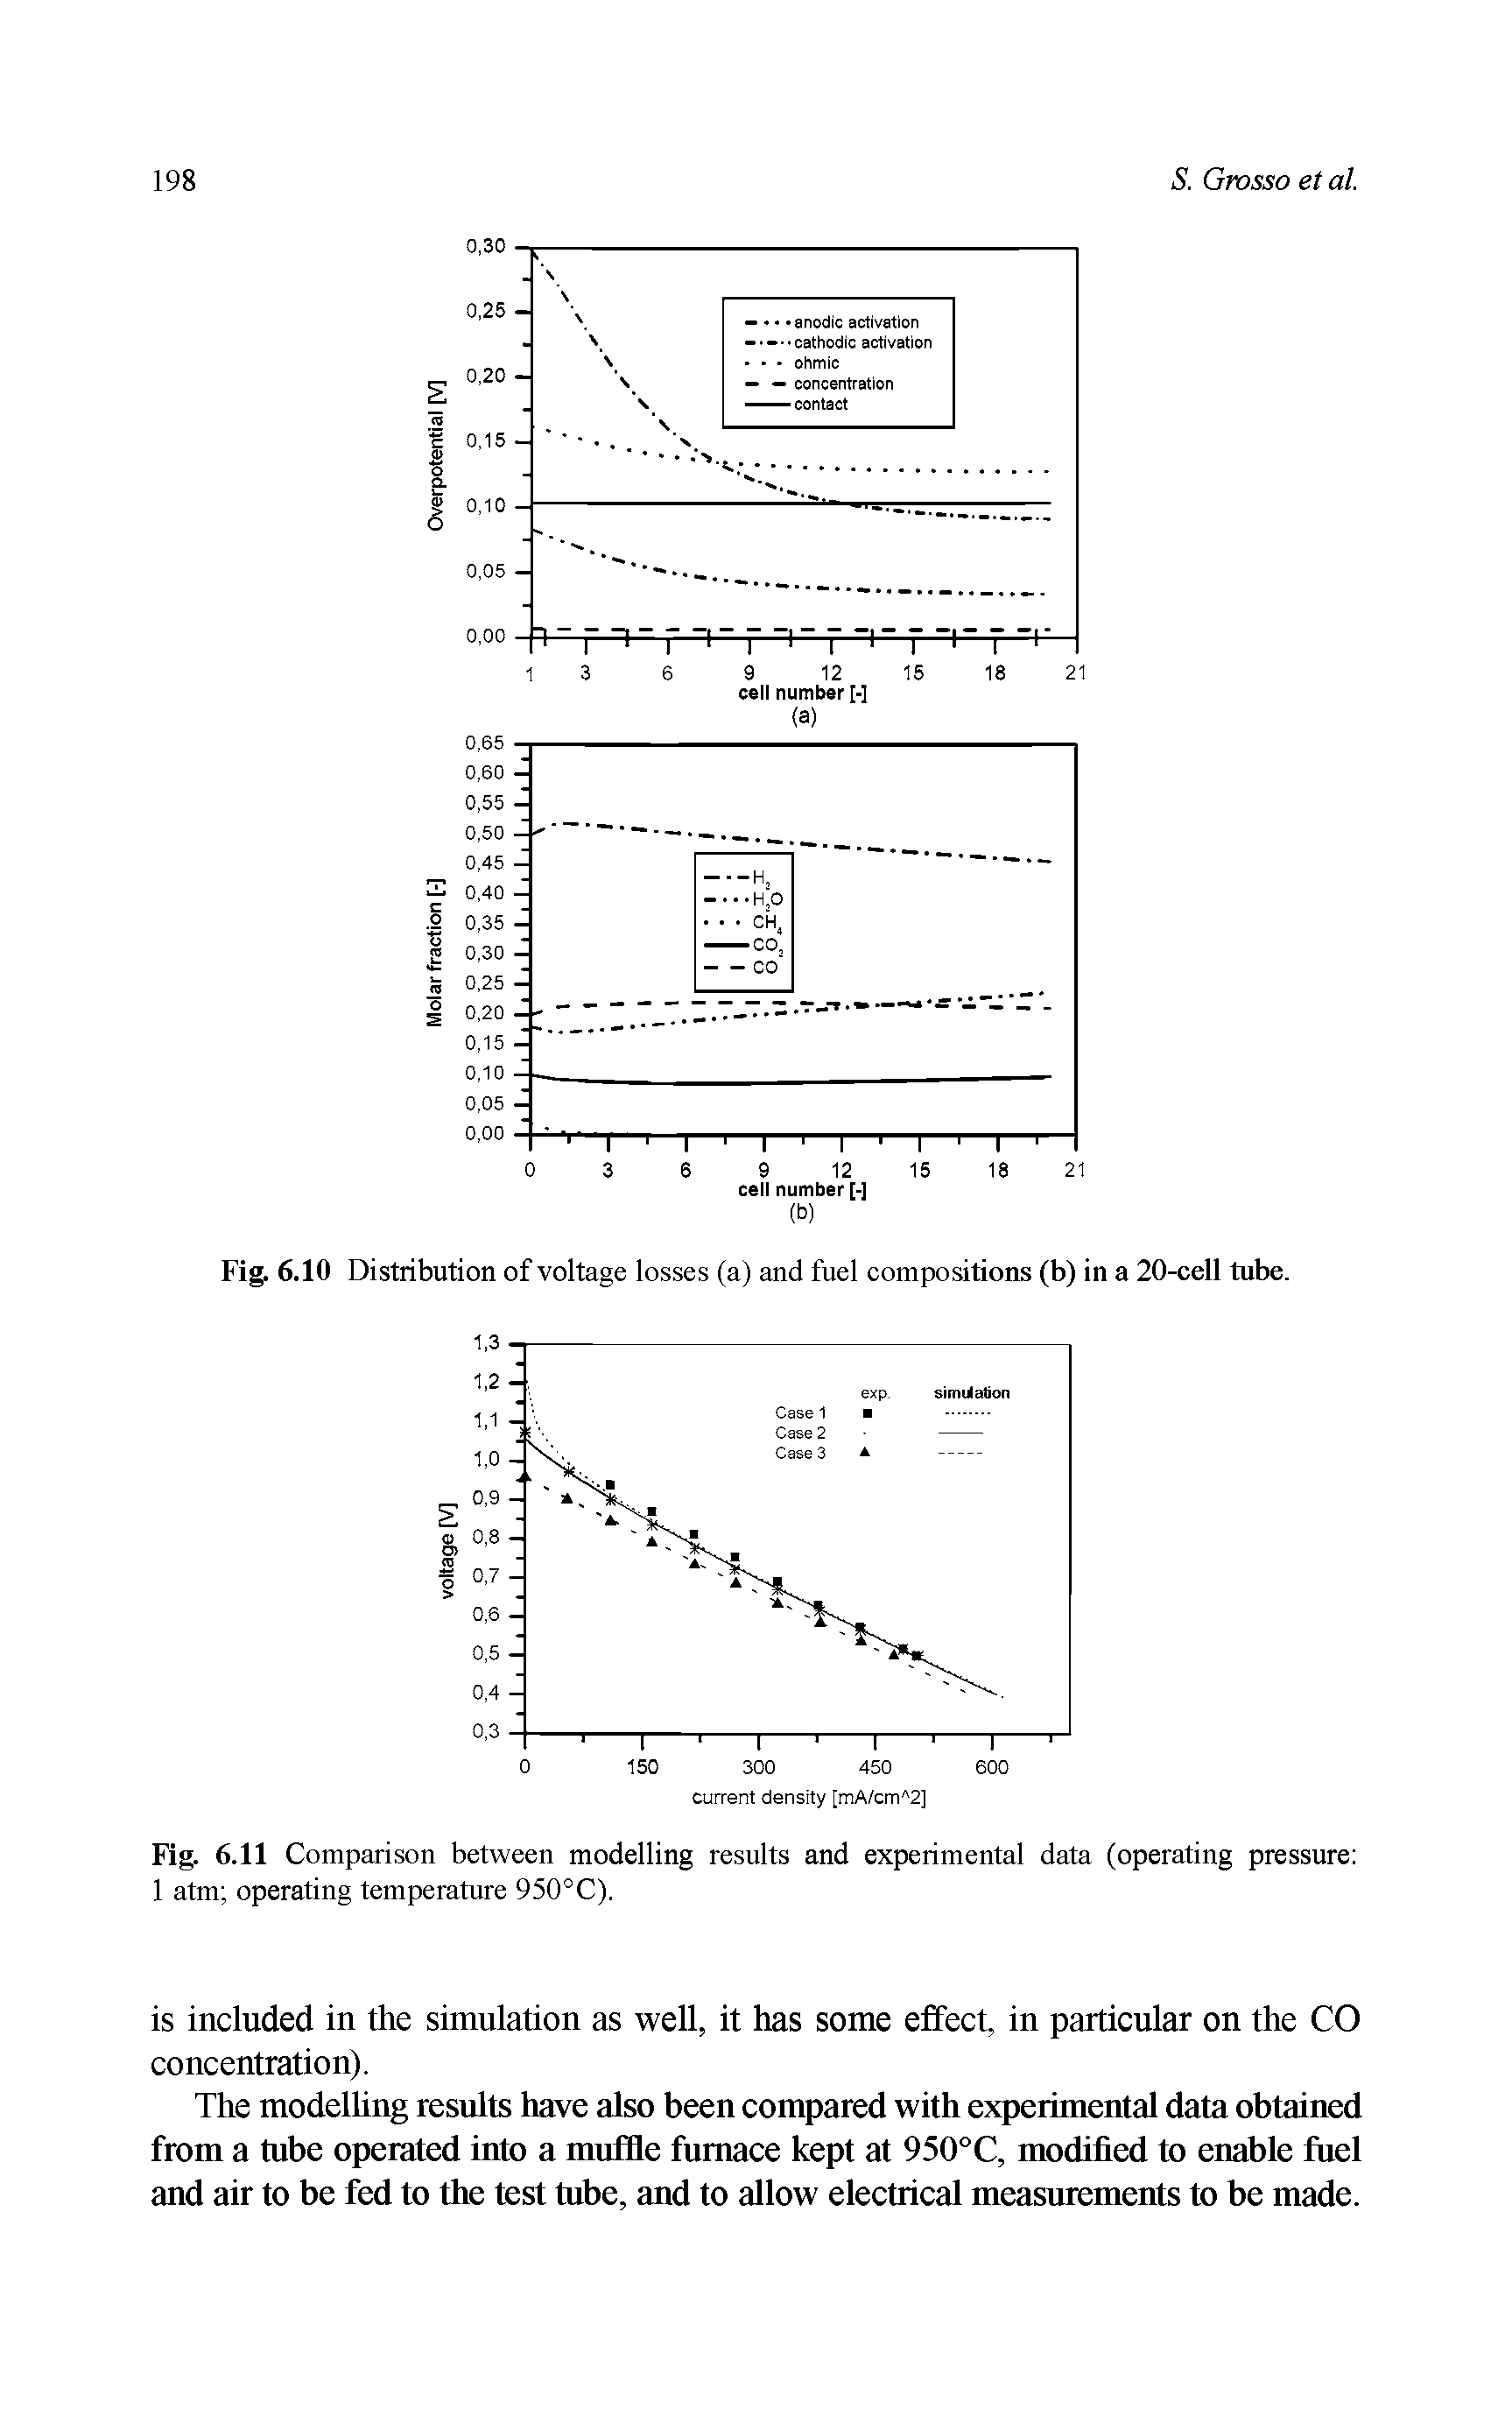 Fig. 6.11 Comparison between modelling results and experimental data (operating pressure 1 atm operating temperature 950°C).